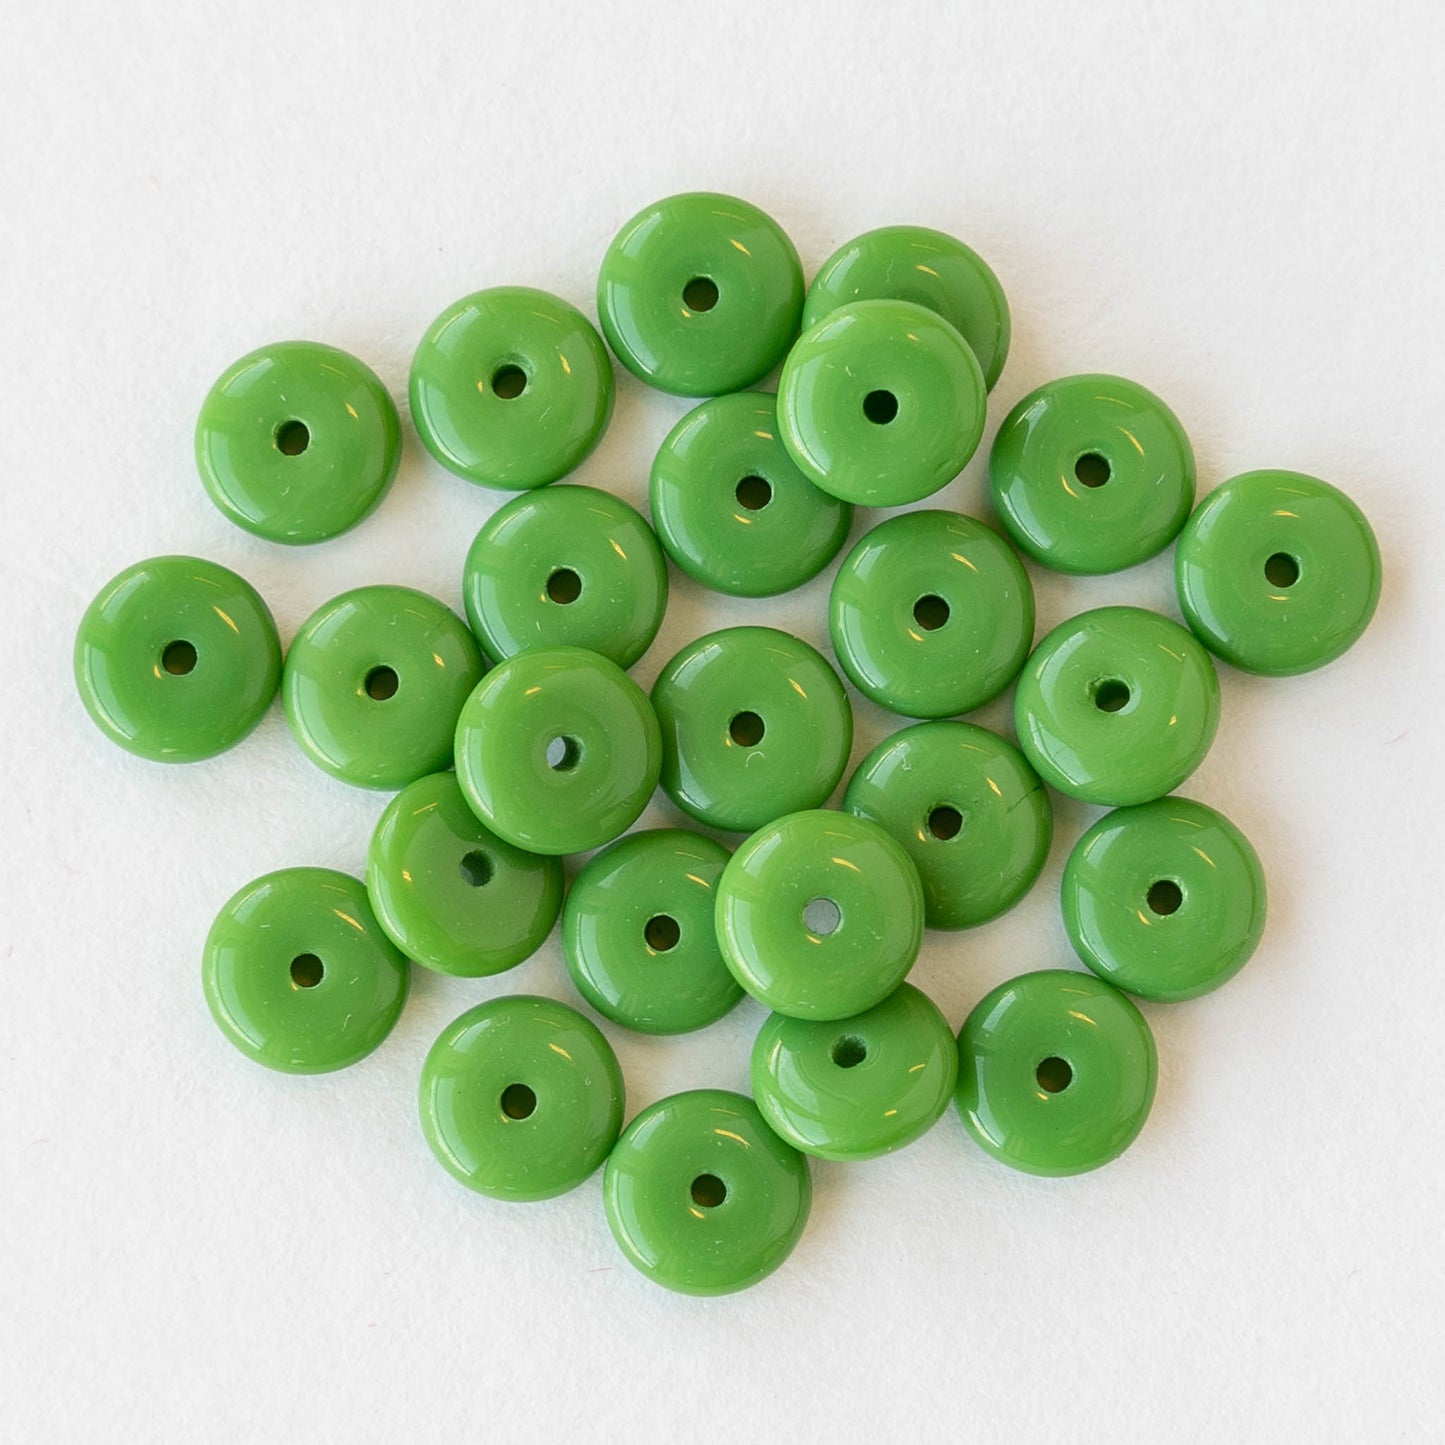 15 Beads 6mm Bright Lime Green Spacer Beads, Small Round Green